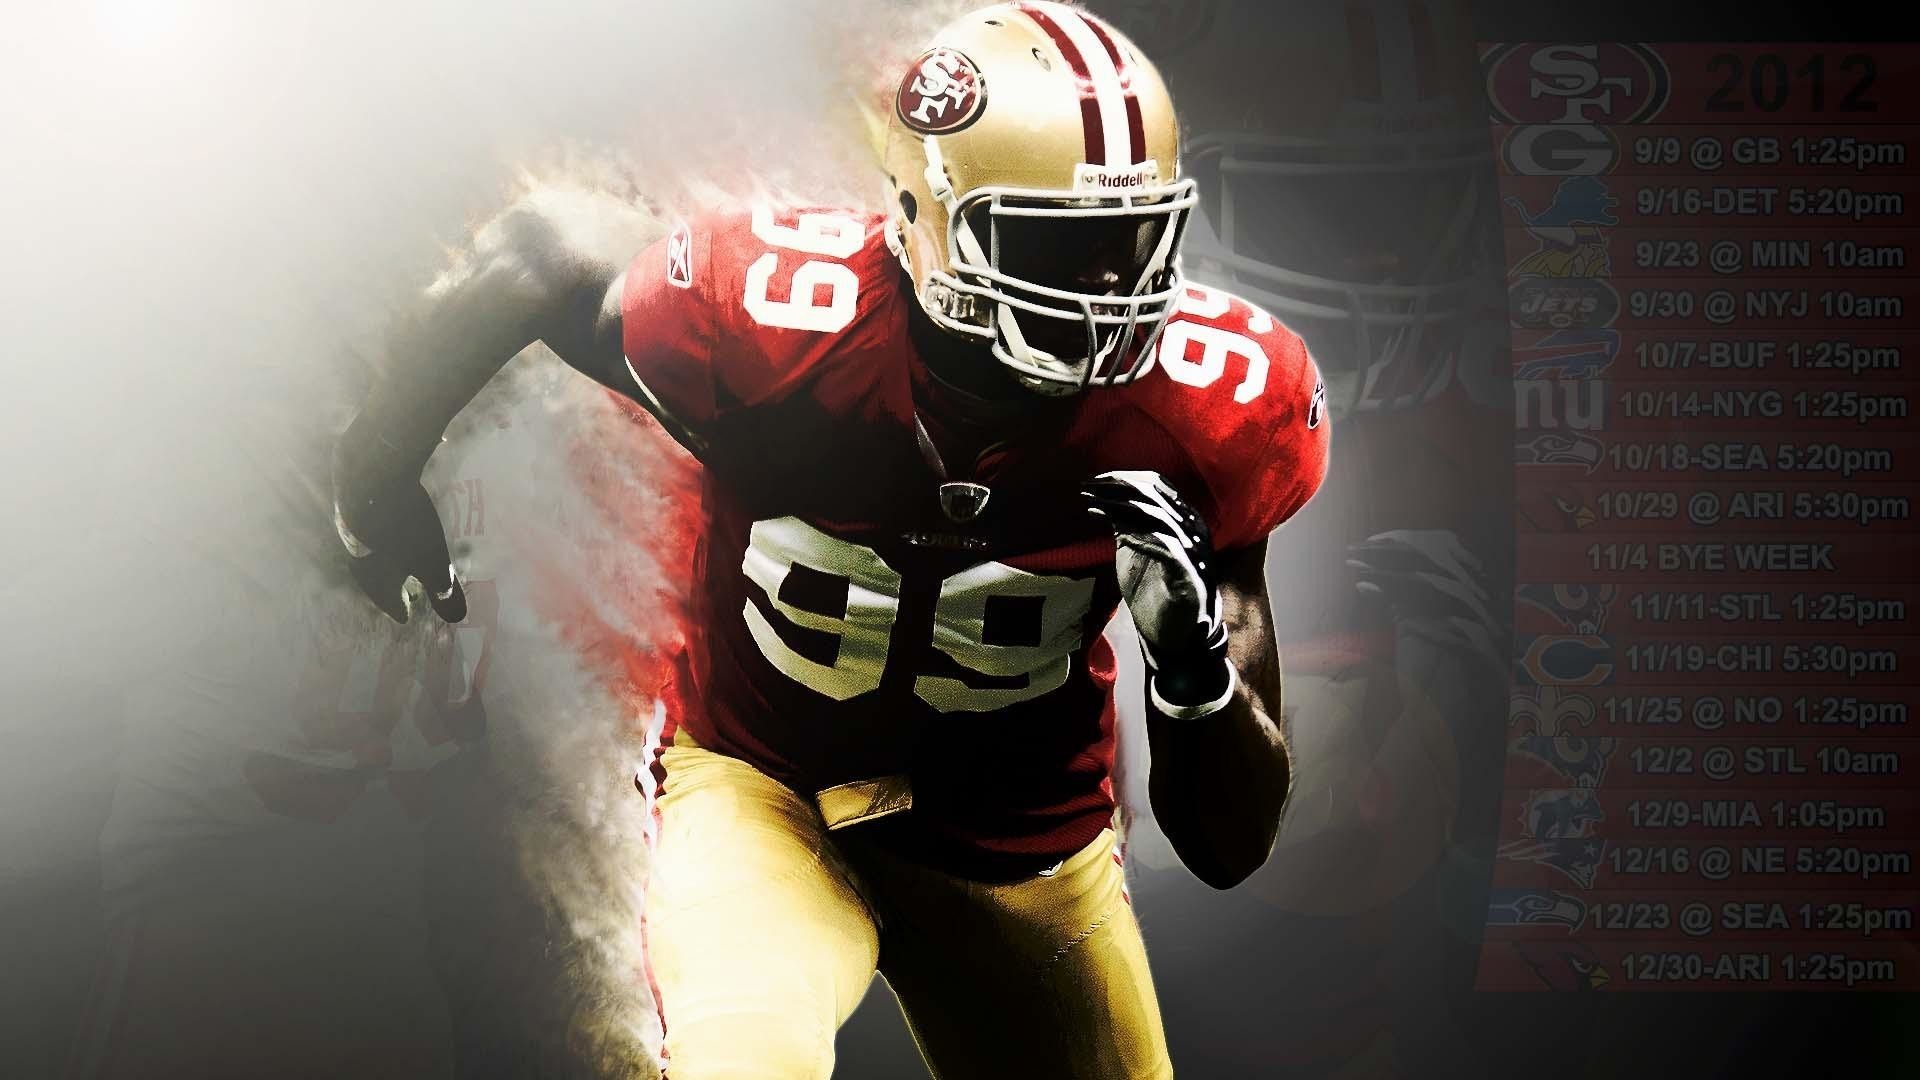 1920x1080 49ers wallpaper hd 49ers wallpapers your phone 67 images .